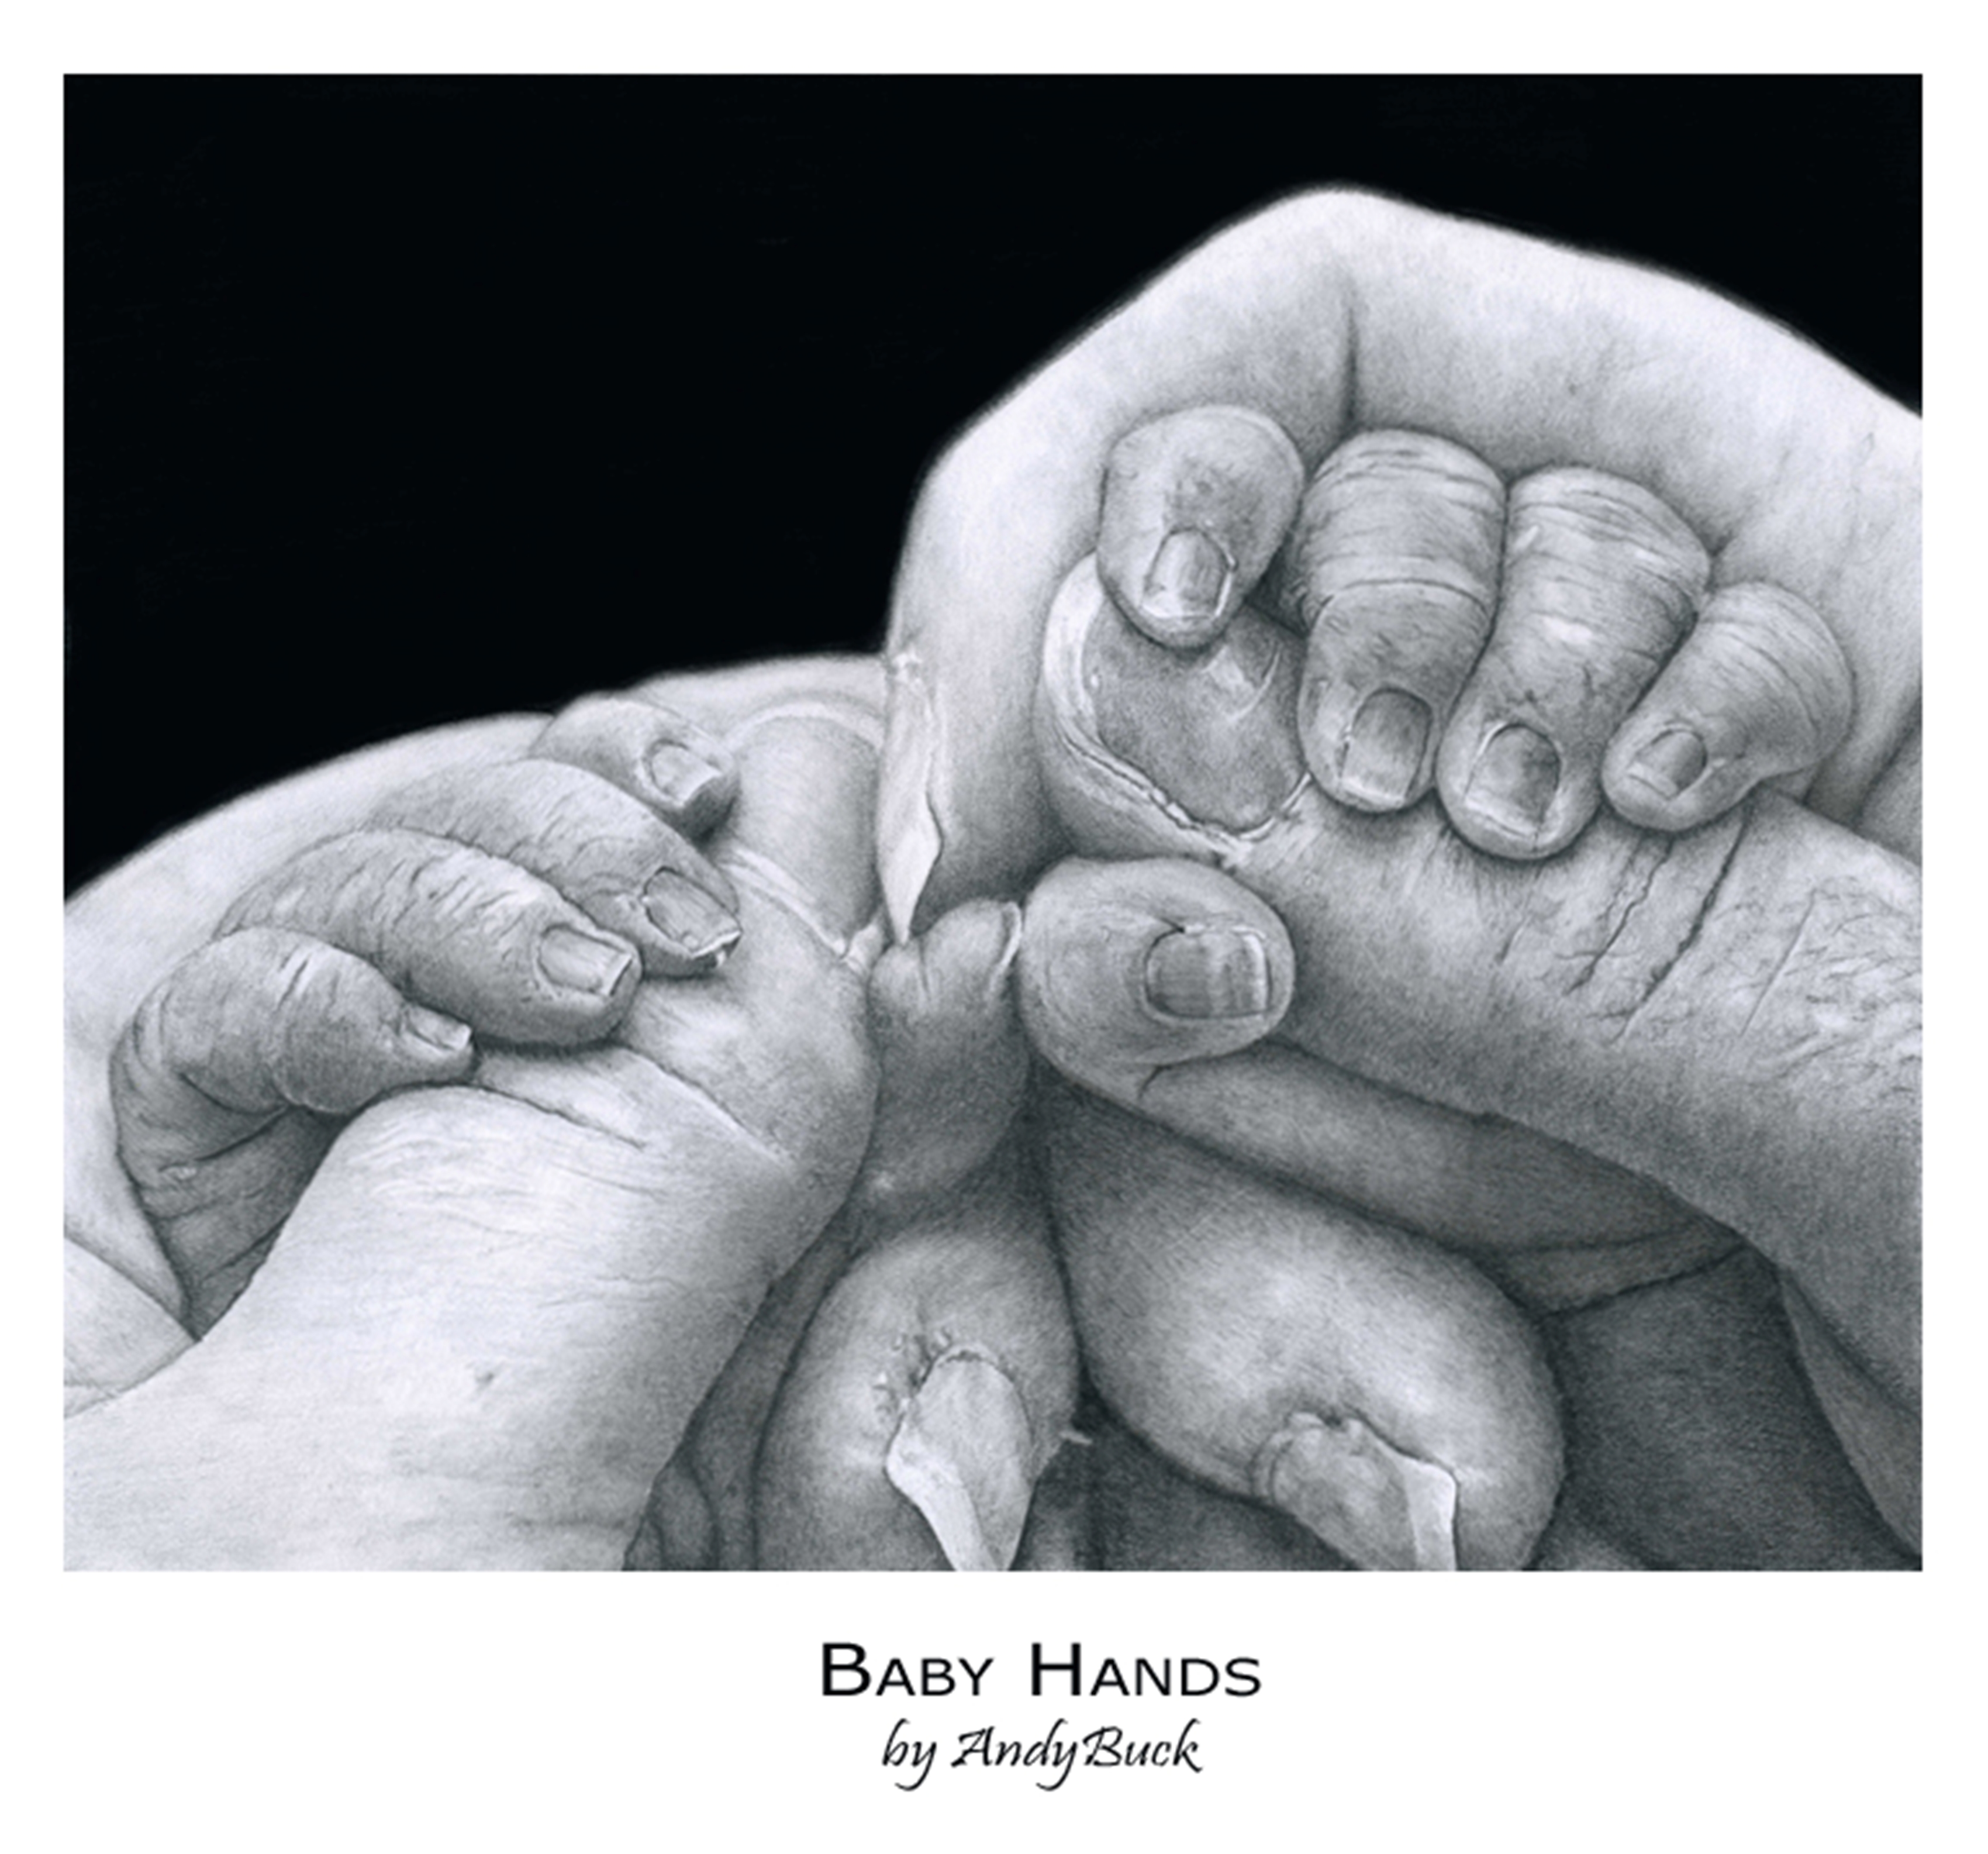 Baby Hands by Andy Buck